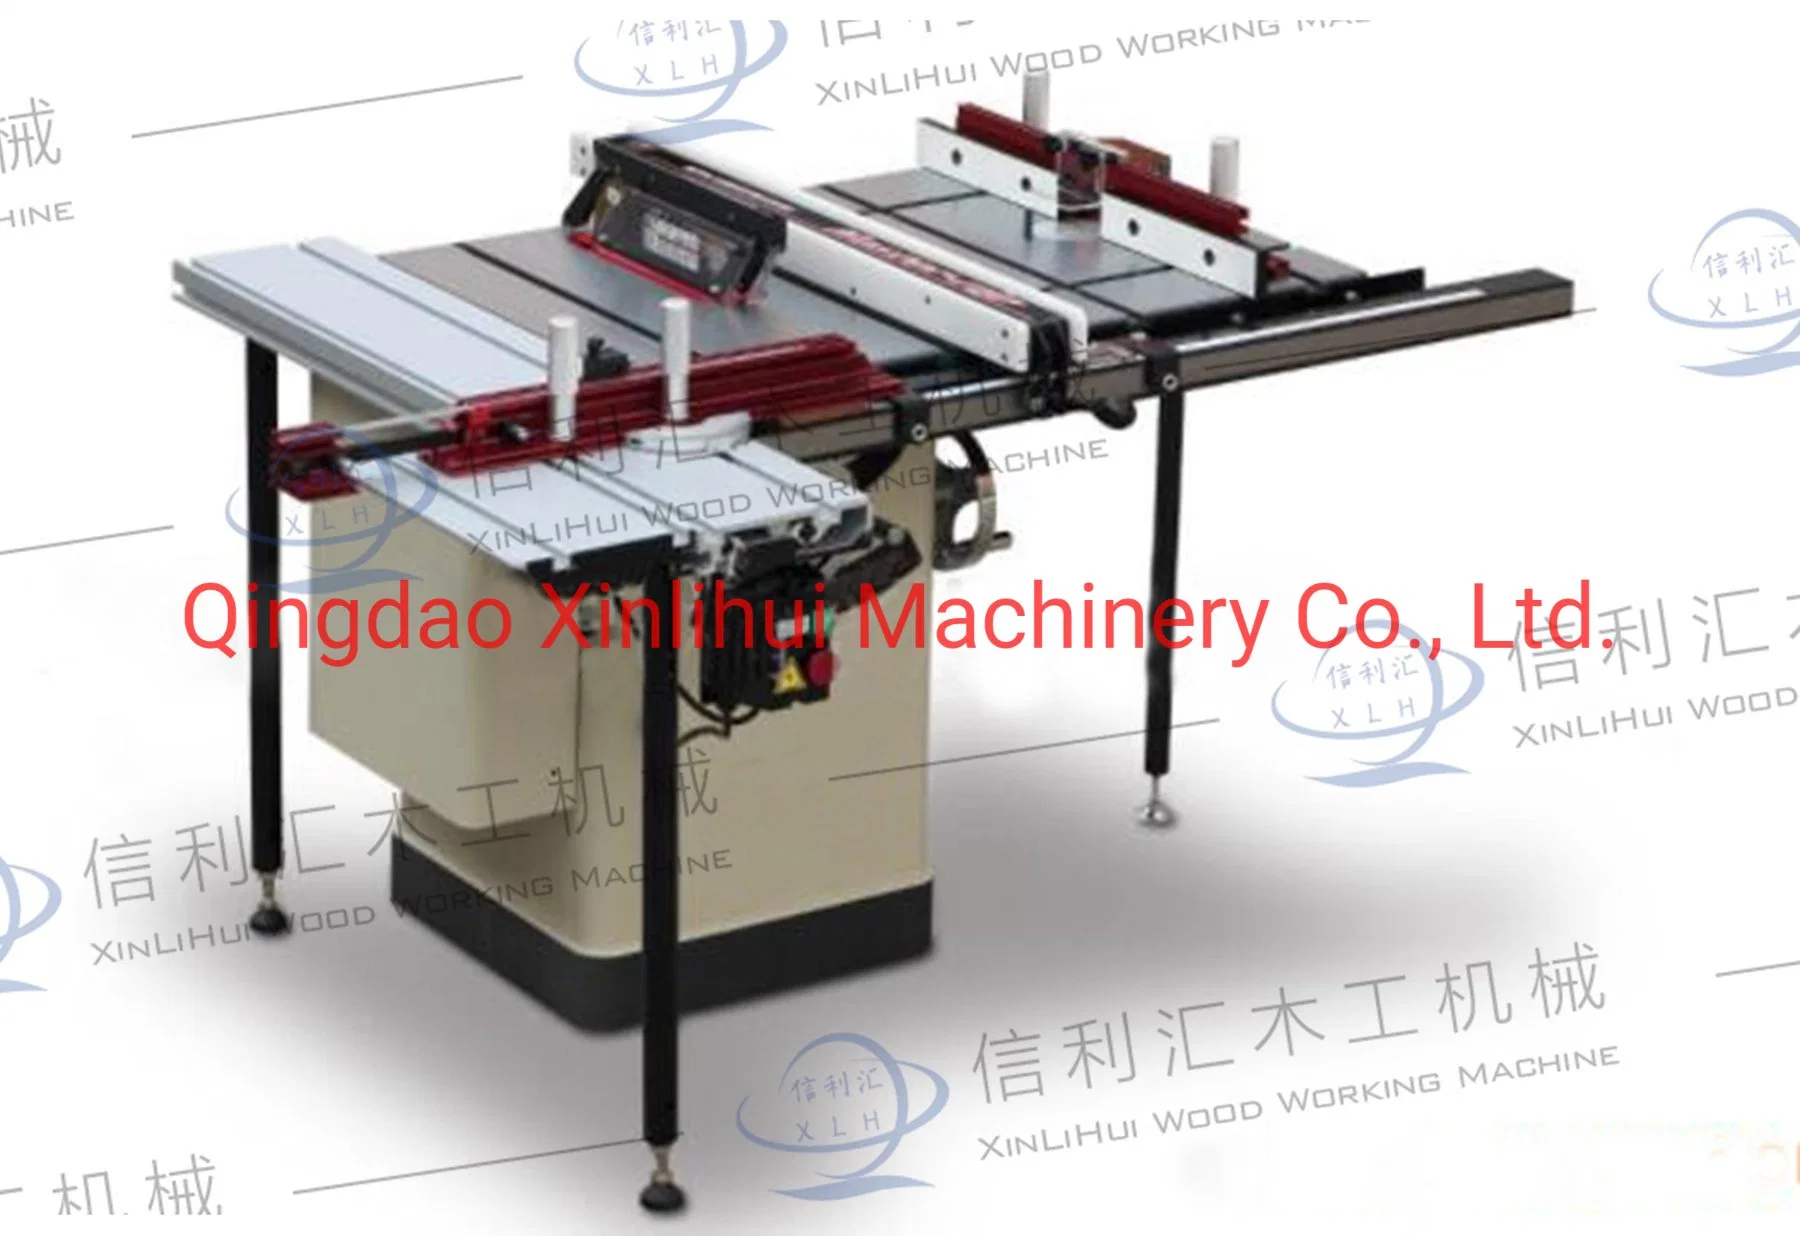 First Choice for High-Precision Wood Sawing and Milling Equipment for Woodworking Enthusiasts, Furniture Industry and Advertising Industry!